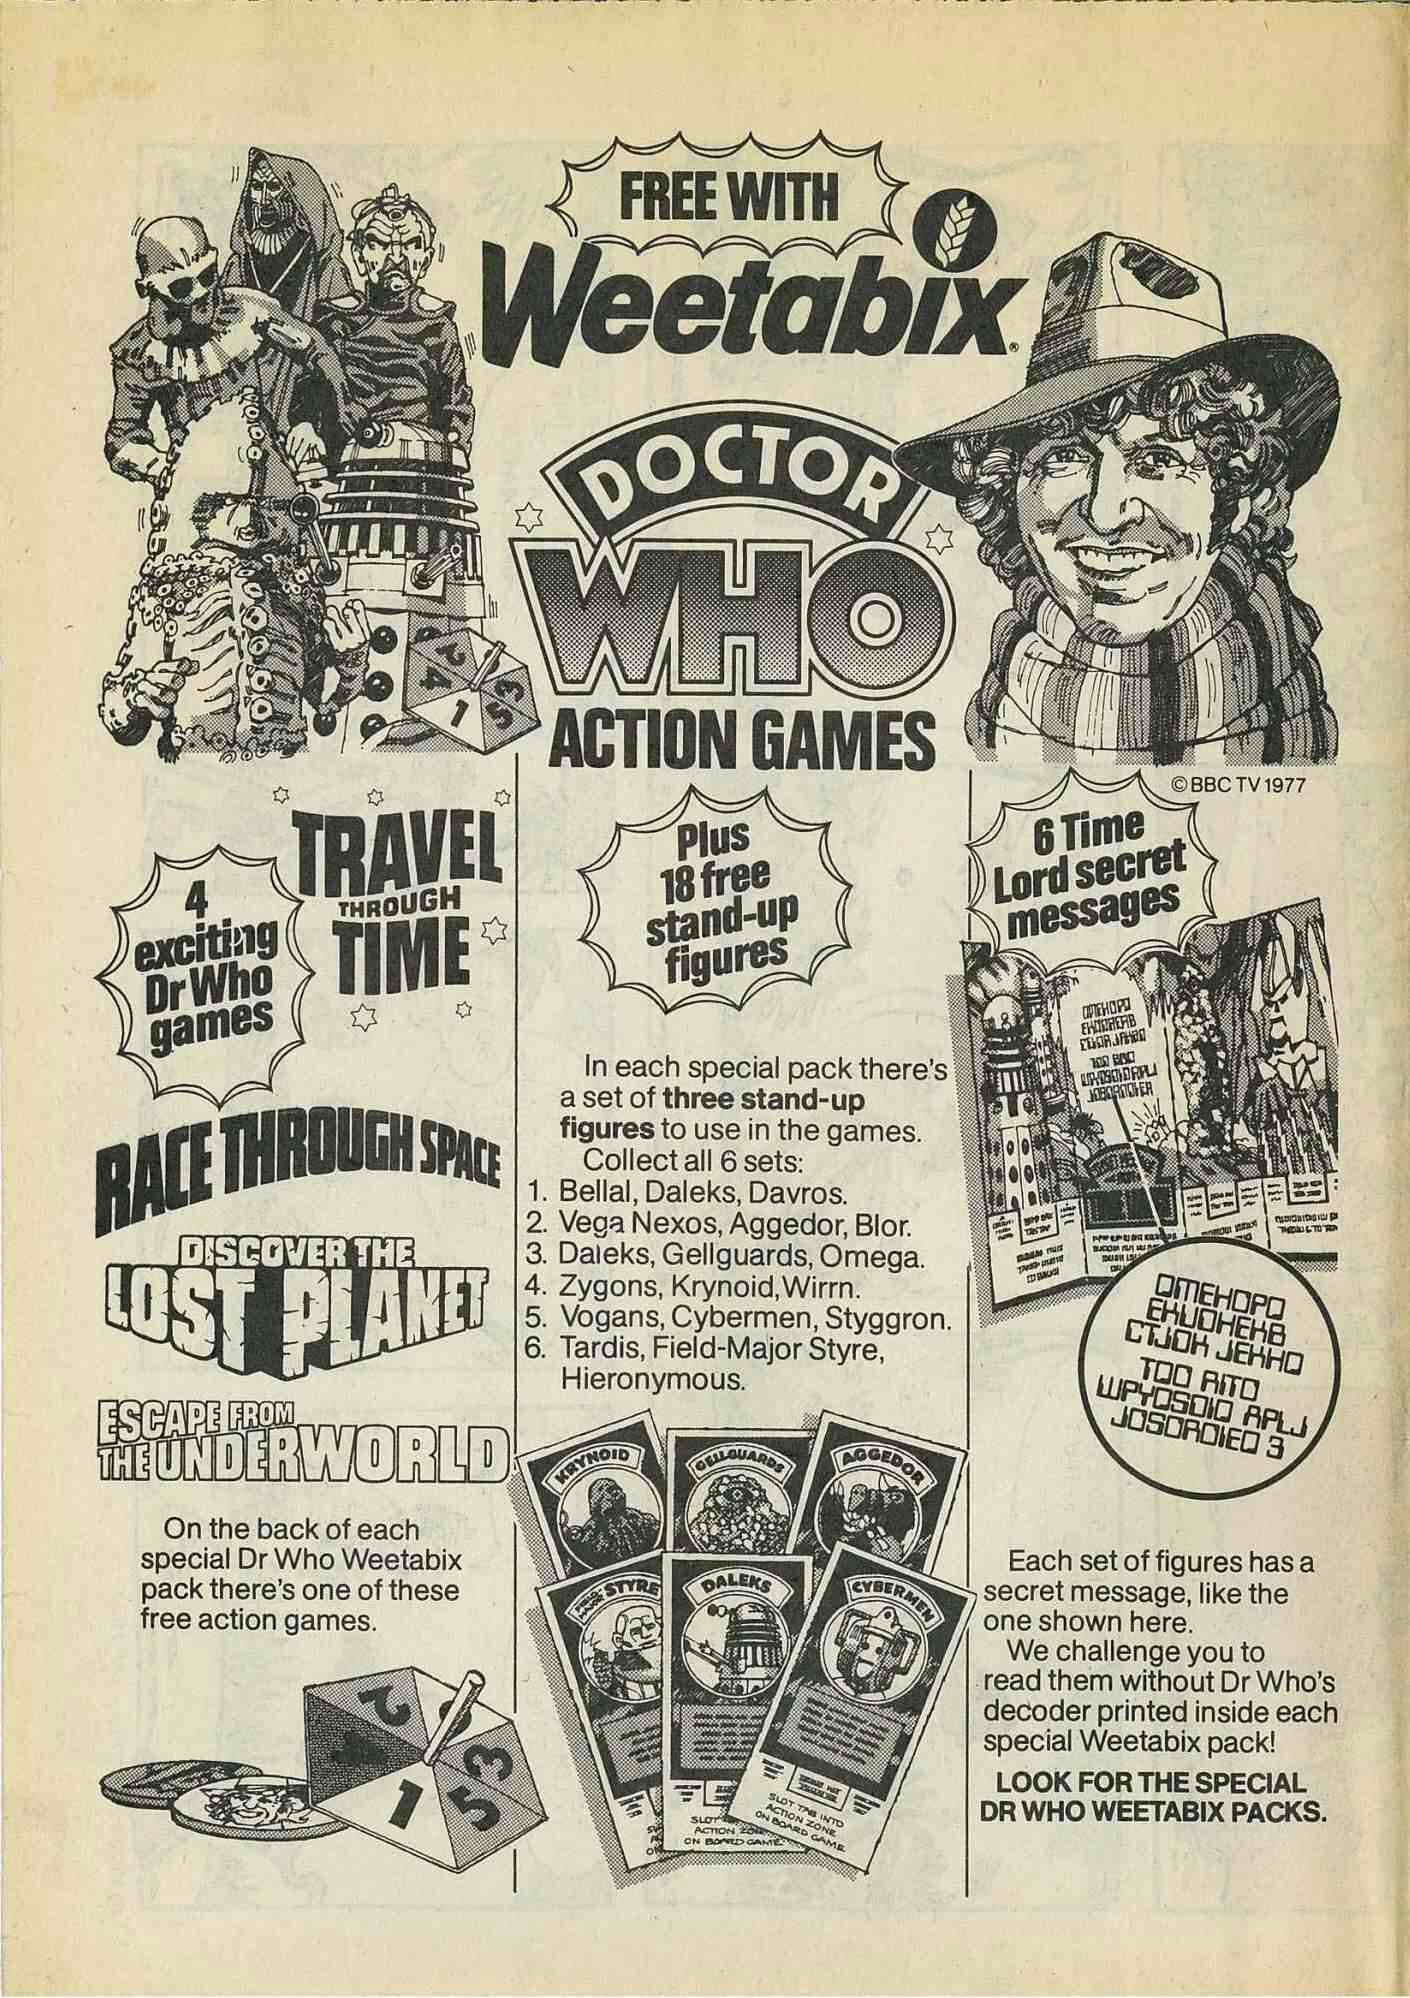 1977 Weetabix Dr Who Action Games